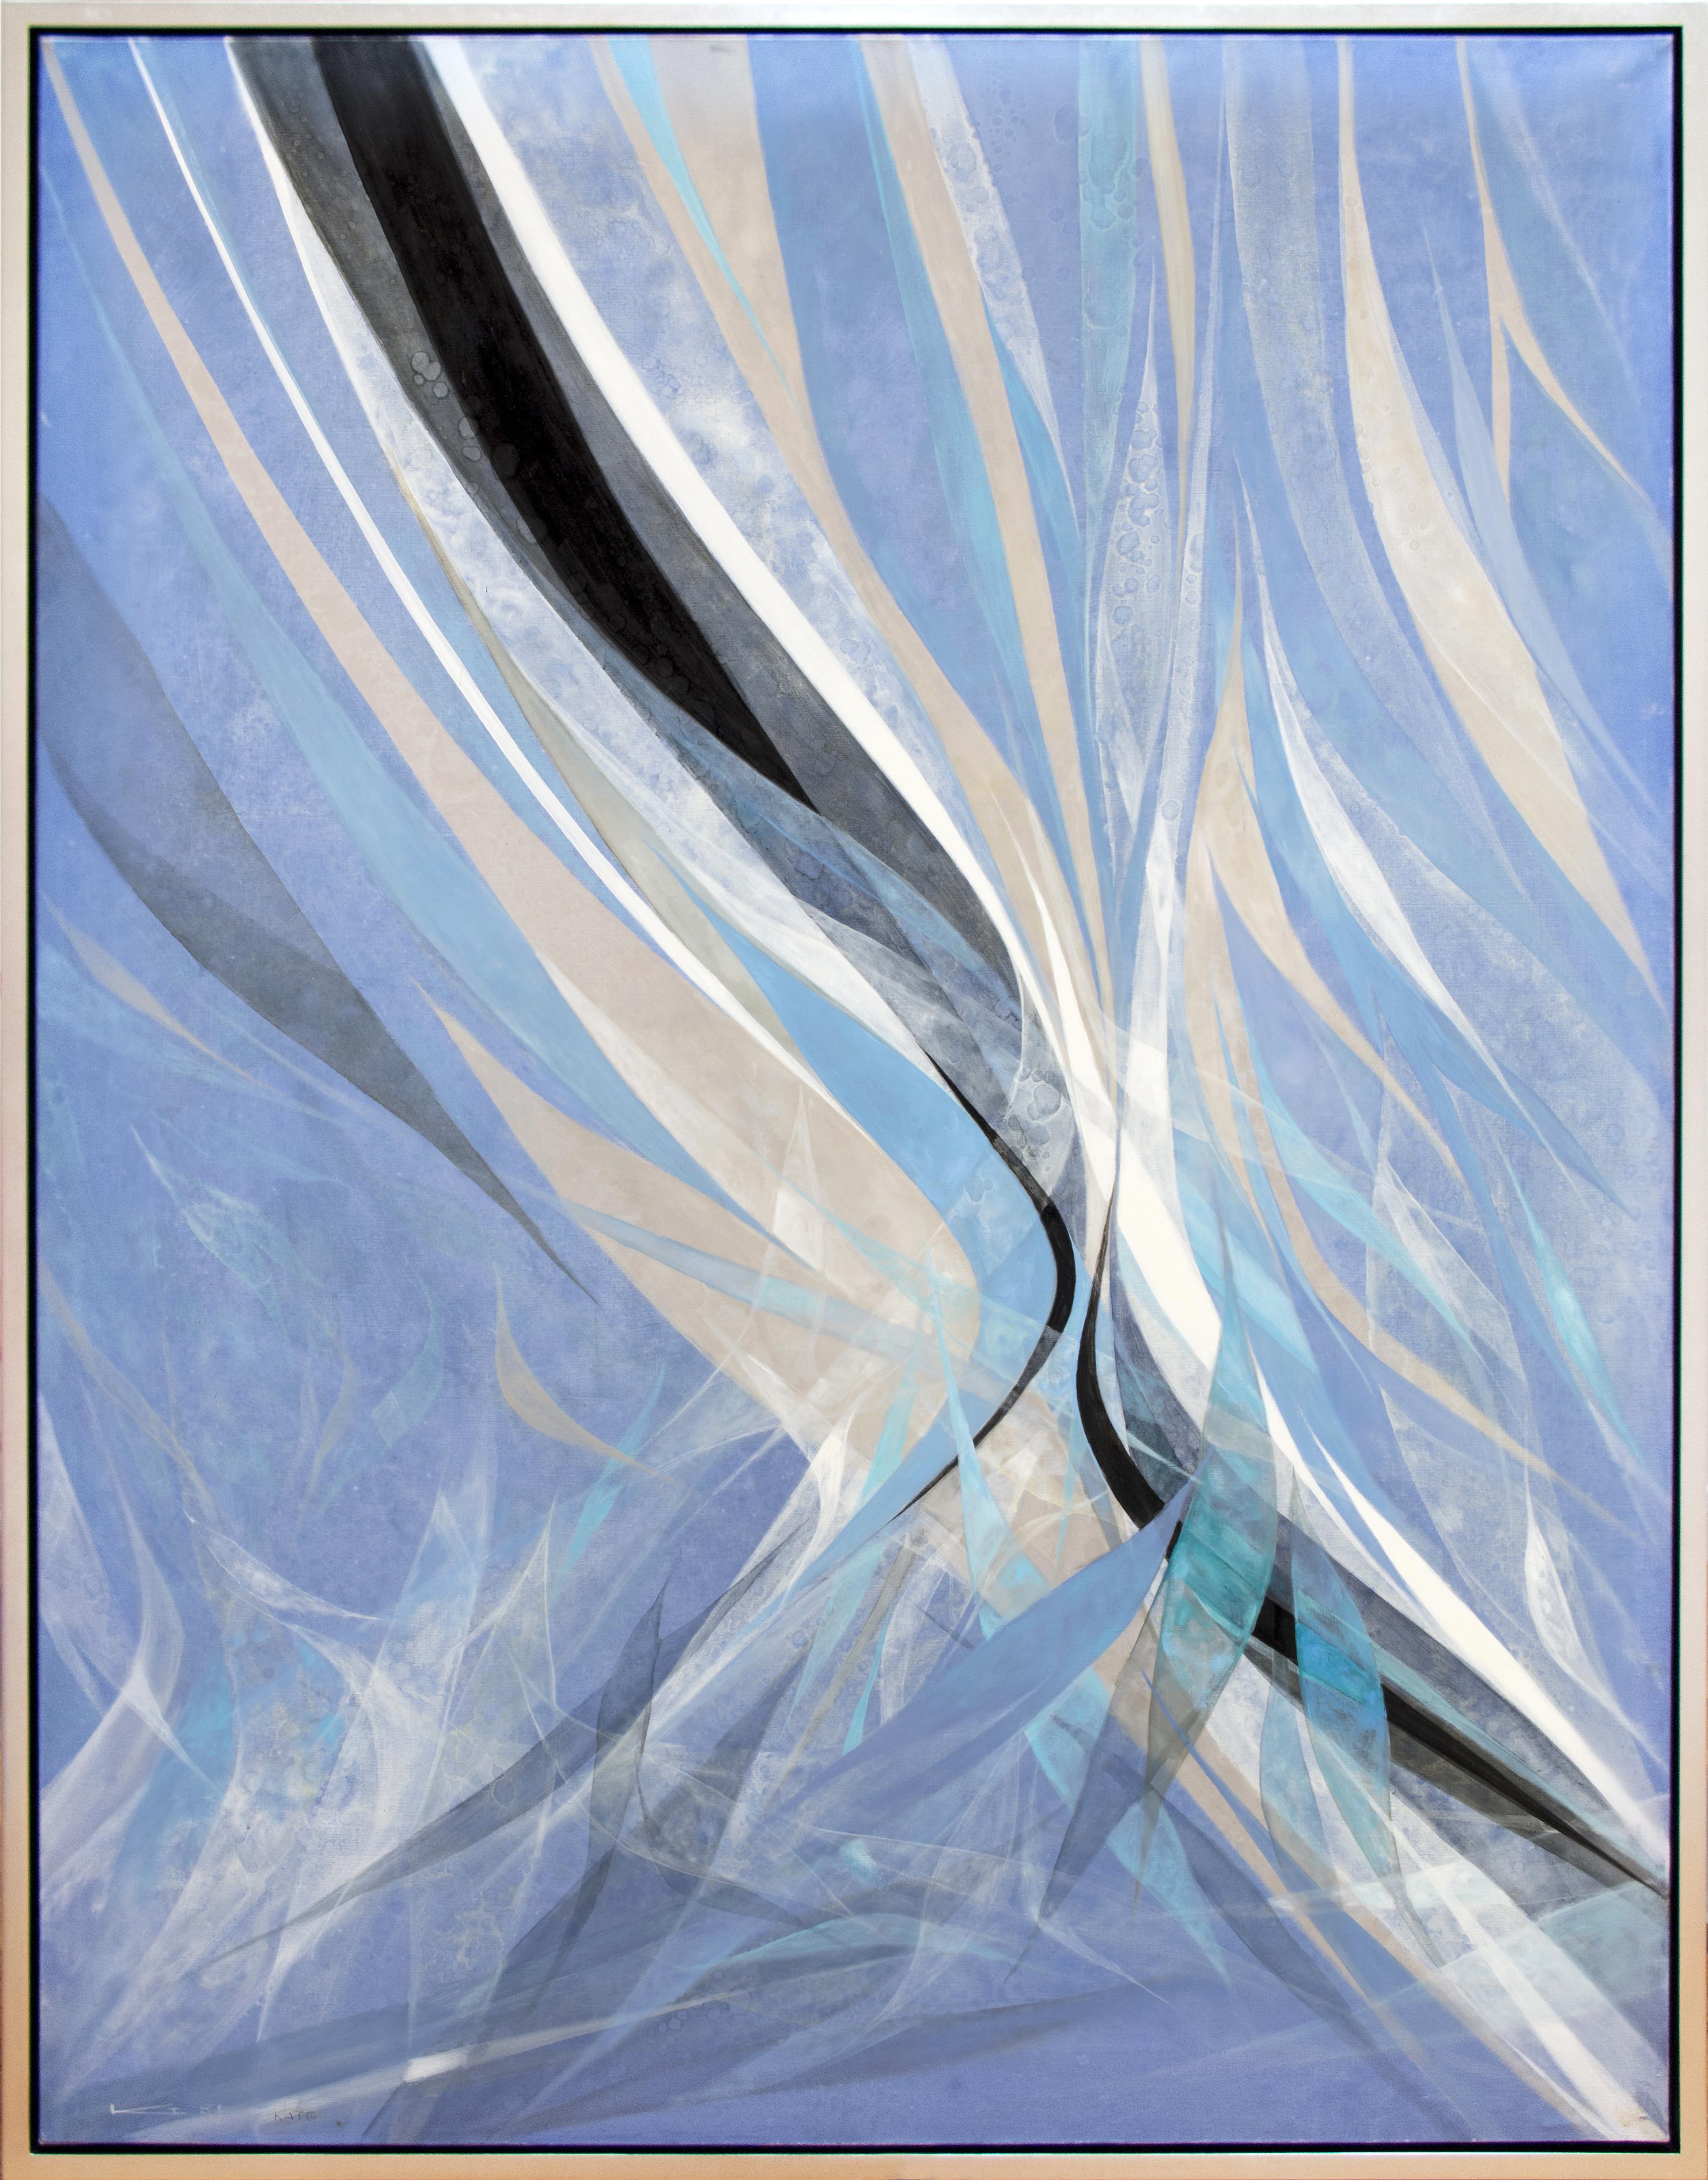 This abstract oil painting features ribbons of colors primarily in shades of blue and teal. There are some gray ribbons as well as black and white across the middle. The layering of these gestures gives the piece a sense of flight and motion.